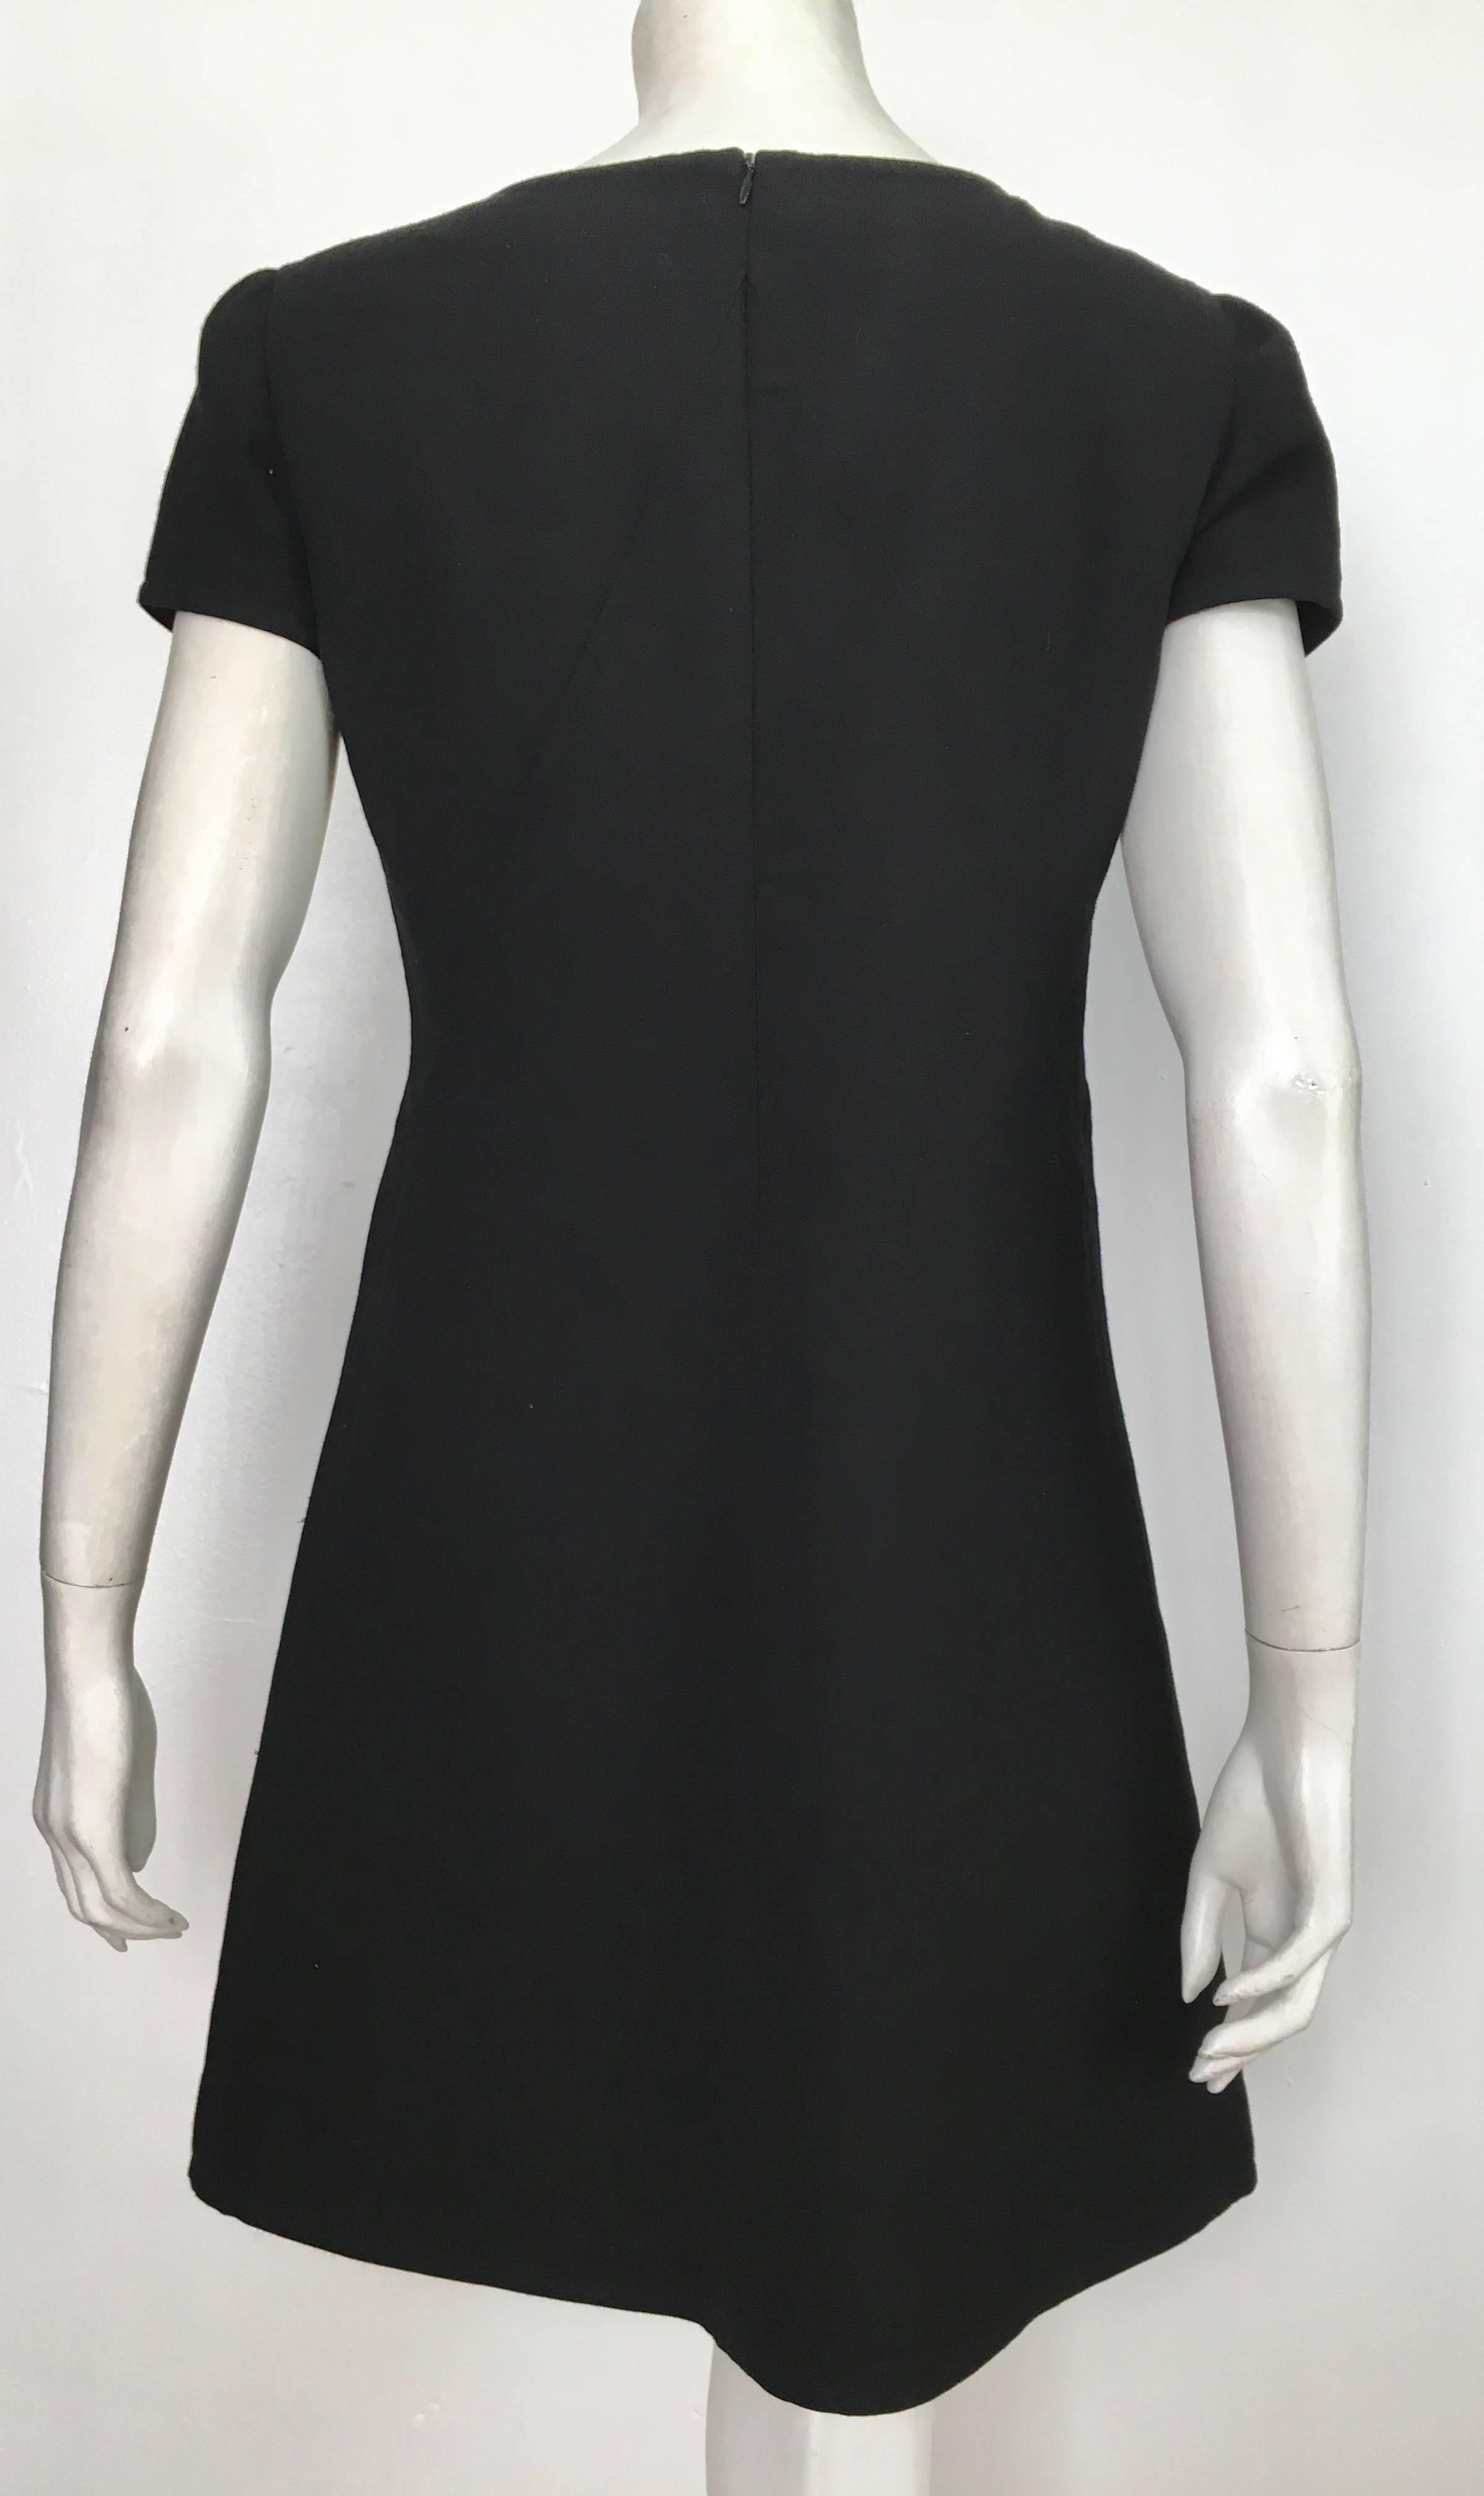 Courreges Black Wool Short Sleeve Dress with Pockets Size 8. 3